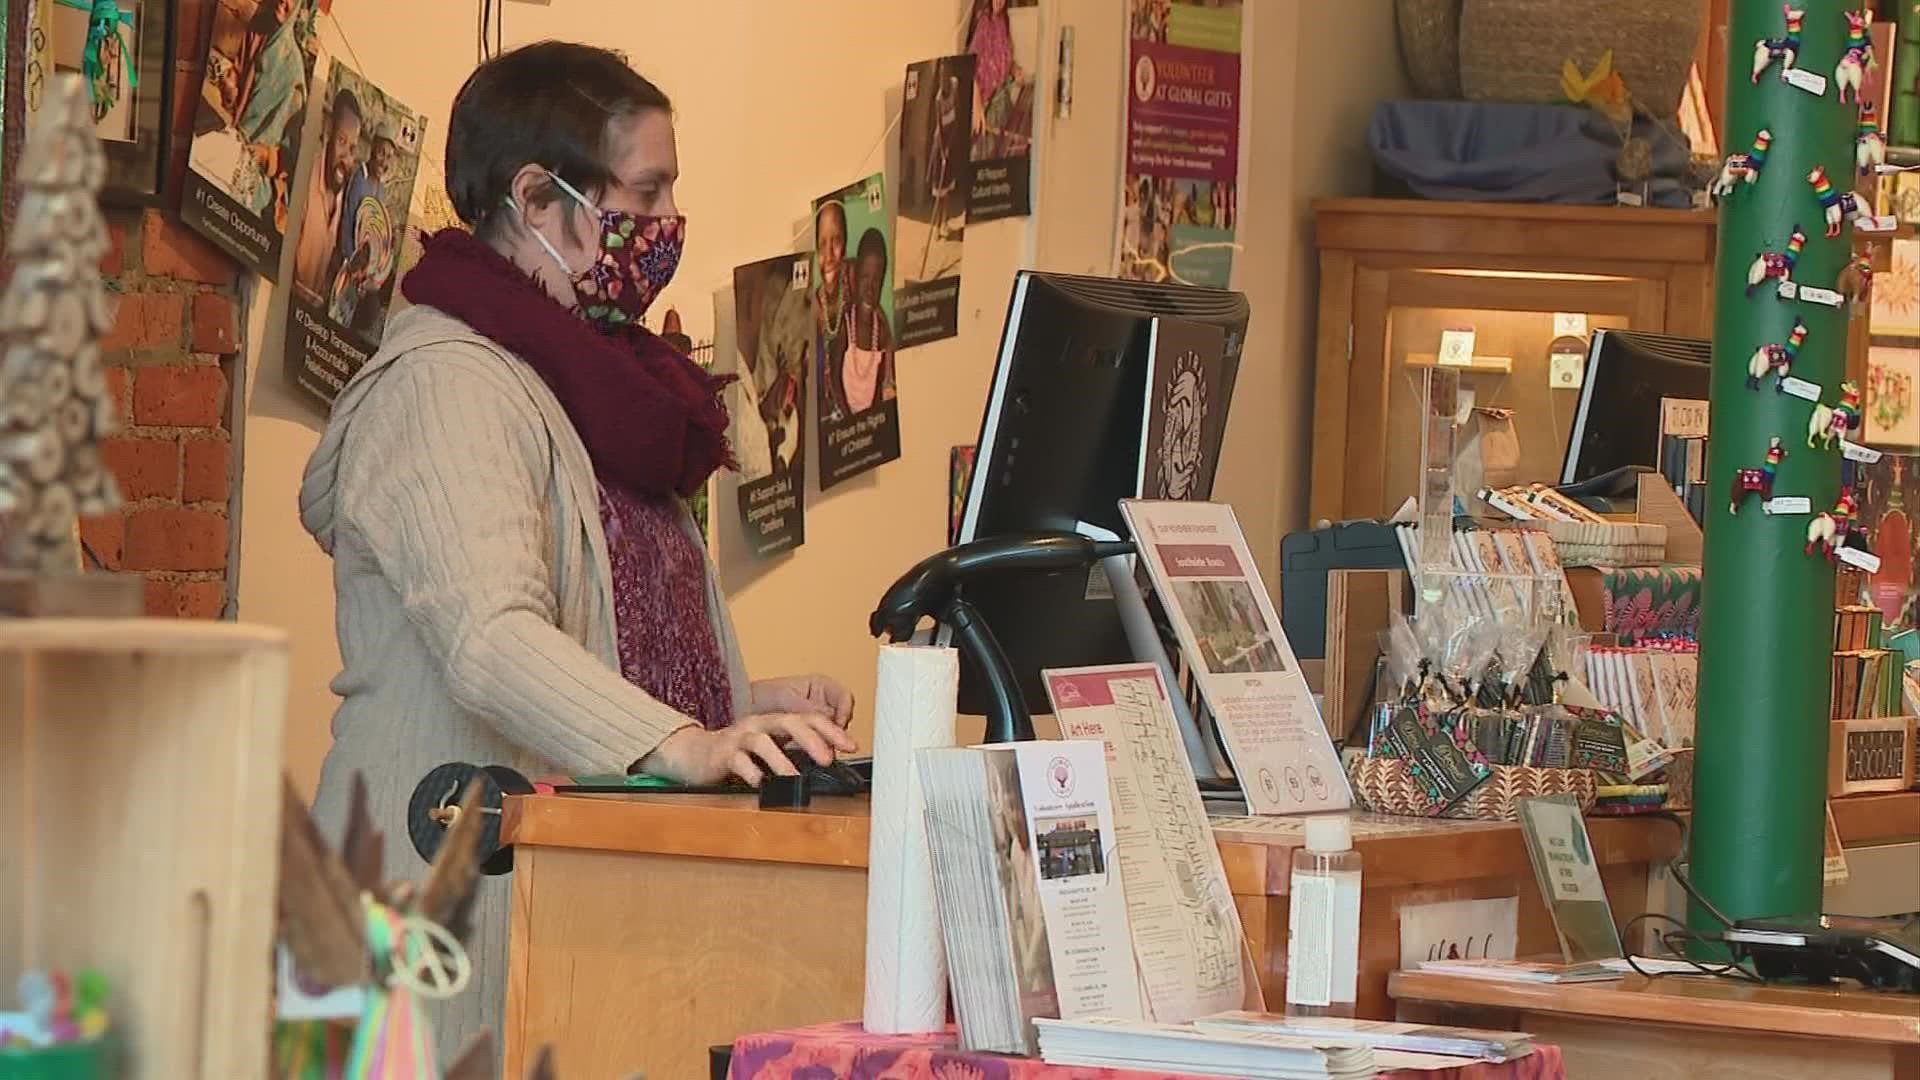 For small business, impacted by COVID-19 restrictions last year, shop owners are hopeful for more foot traffic and people coming in to avoid shipping altogether.